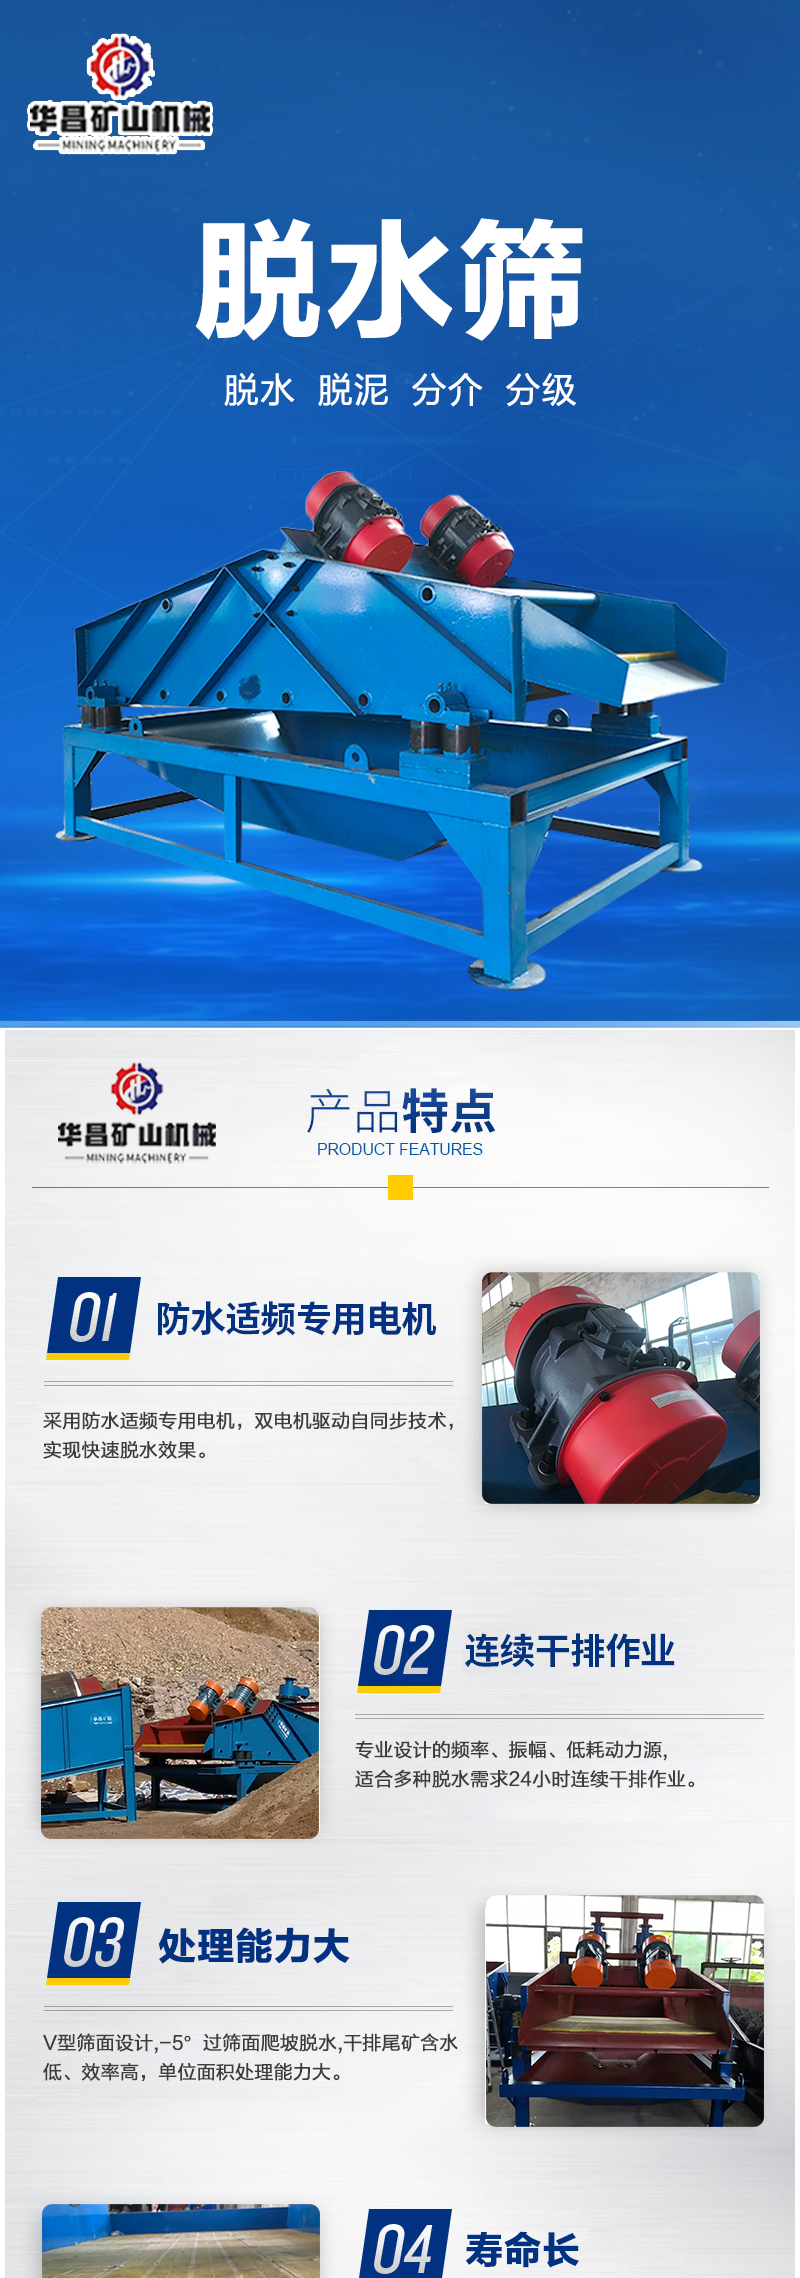 Reservoir mud and sand separation, tail mud dewatering screen, clean coal dry discharge screen, vibrating screen for mining, high-frequency linear polyurethane screen